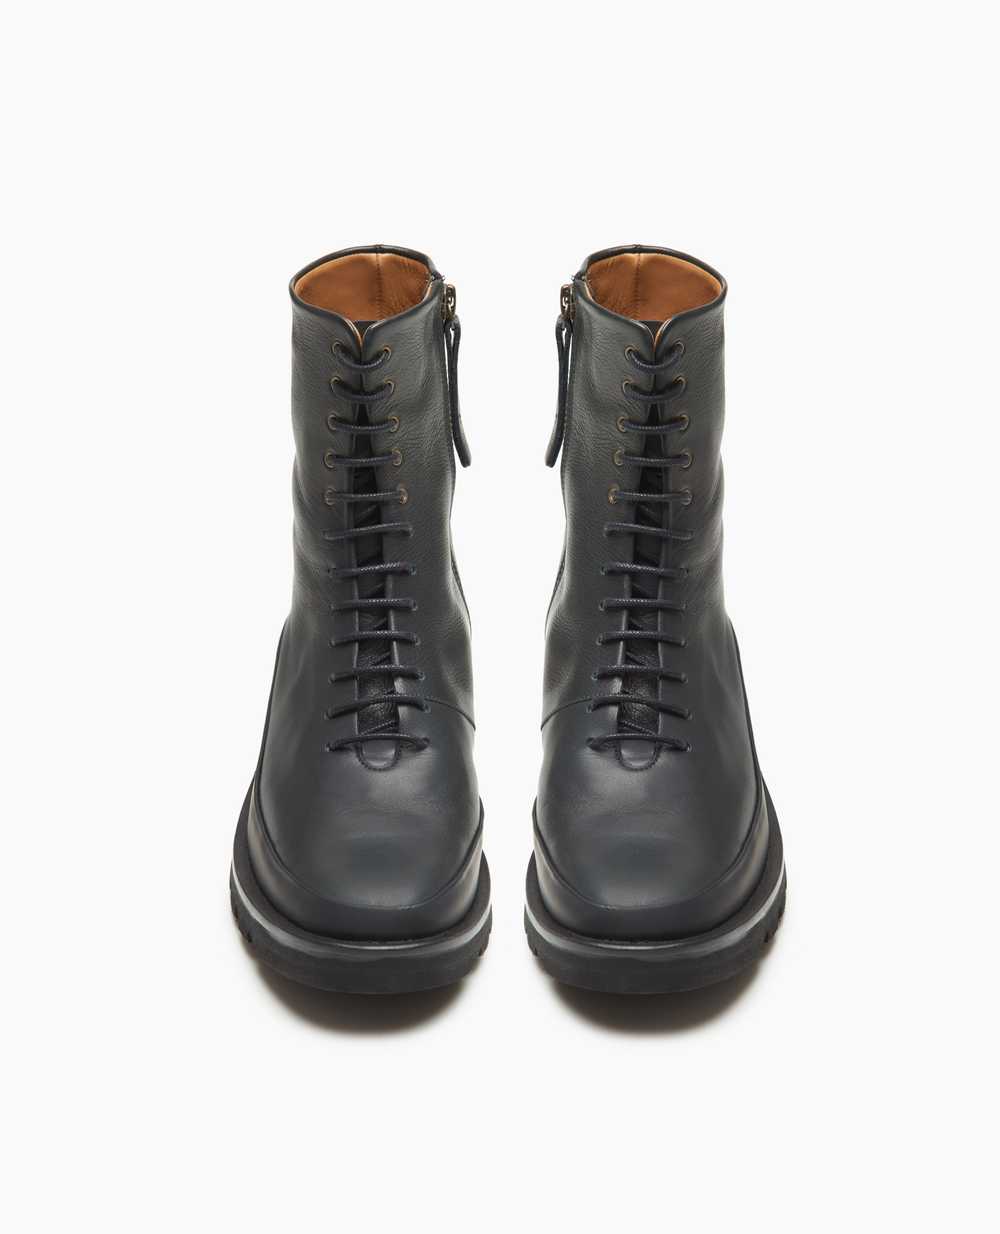 Coclico Dal Boot - Black Leather - image 2